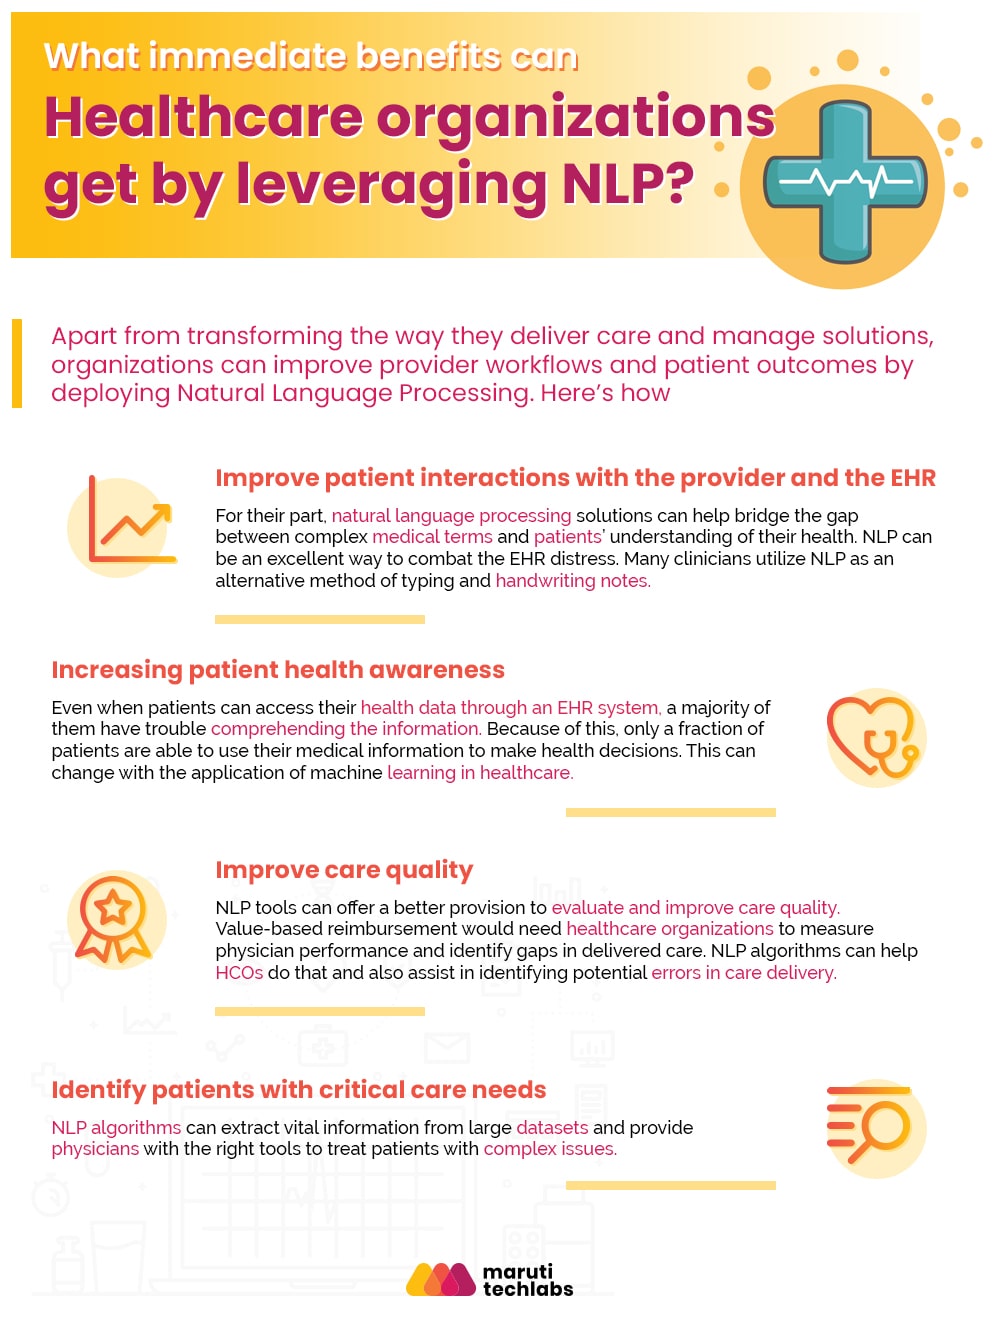 How Can Healthcare Organizations Leverage NLP?